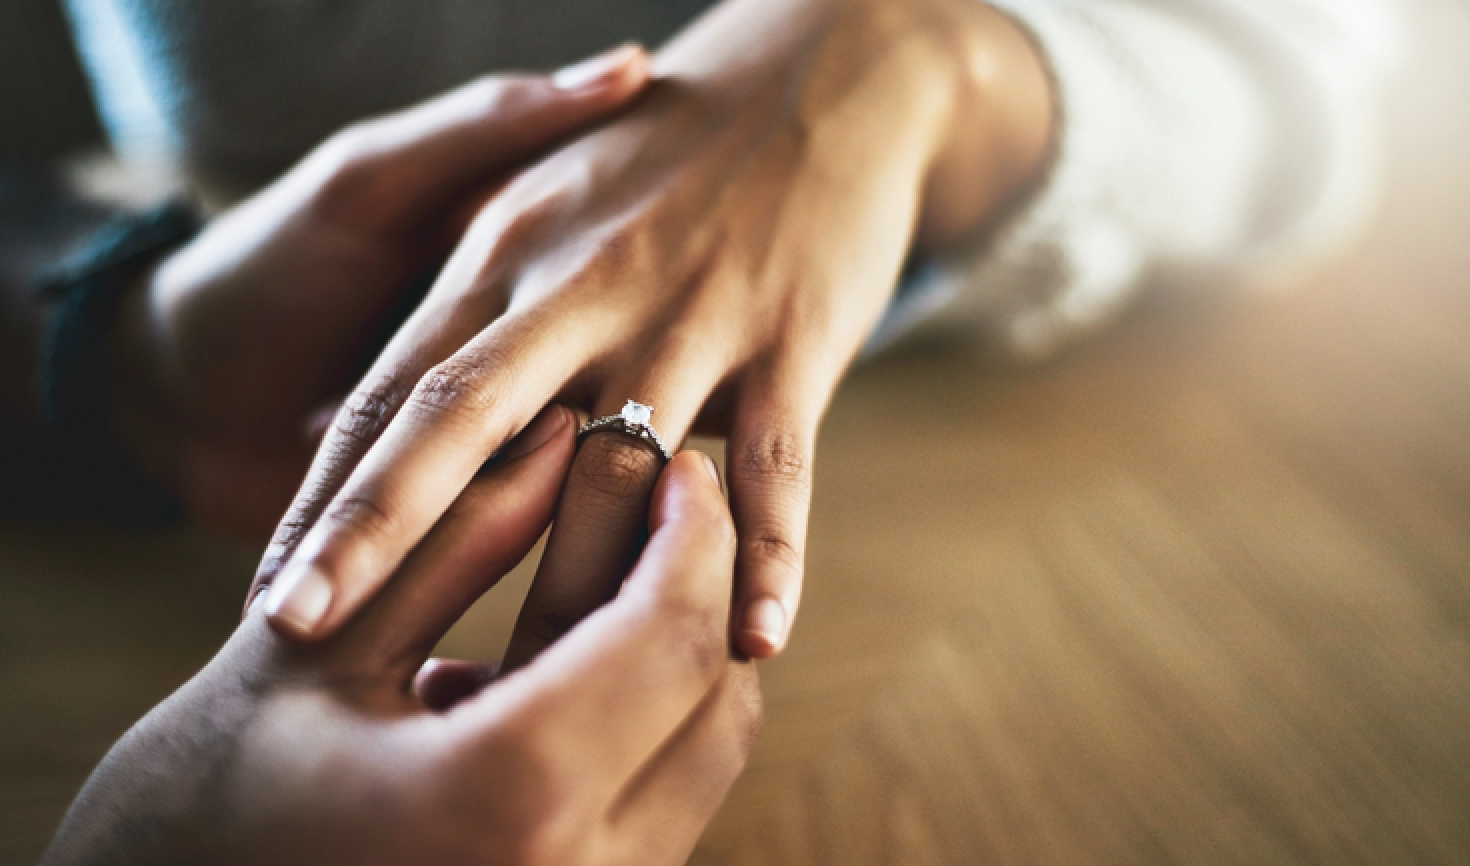 New study discovers marriage helps men live longer, but causes women to die younger